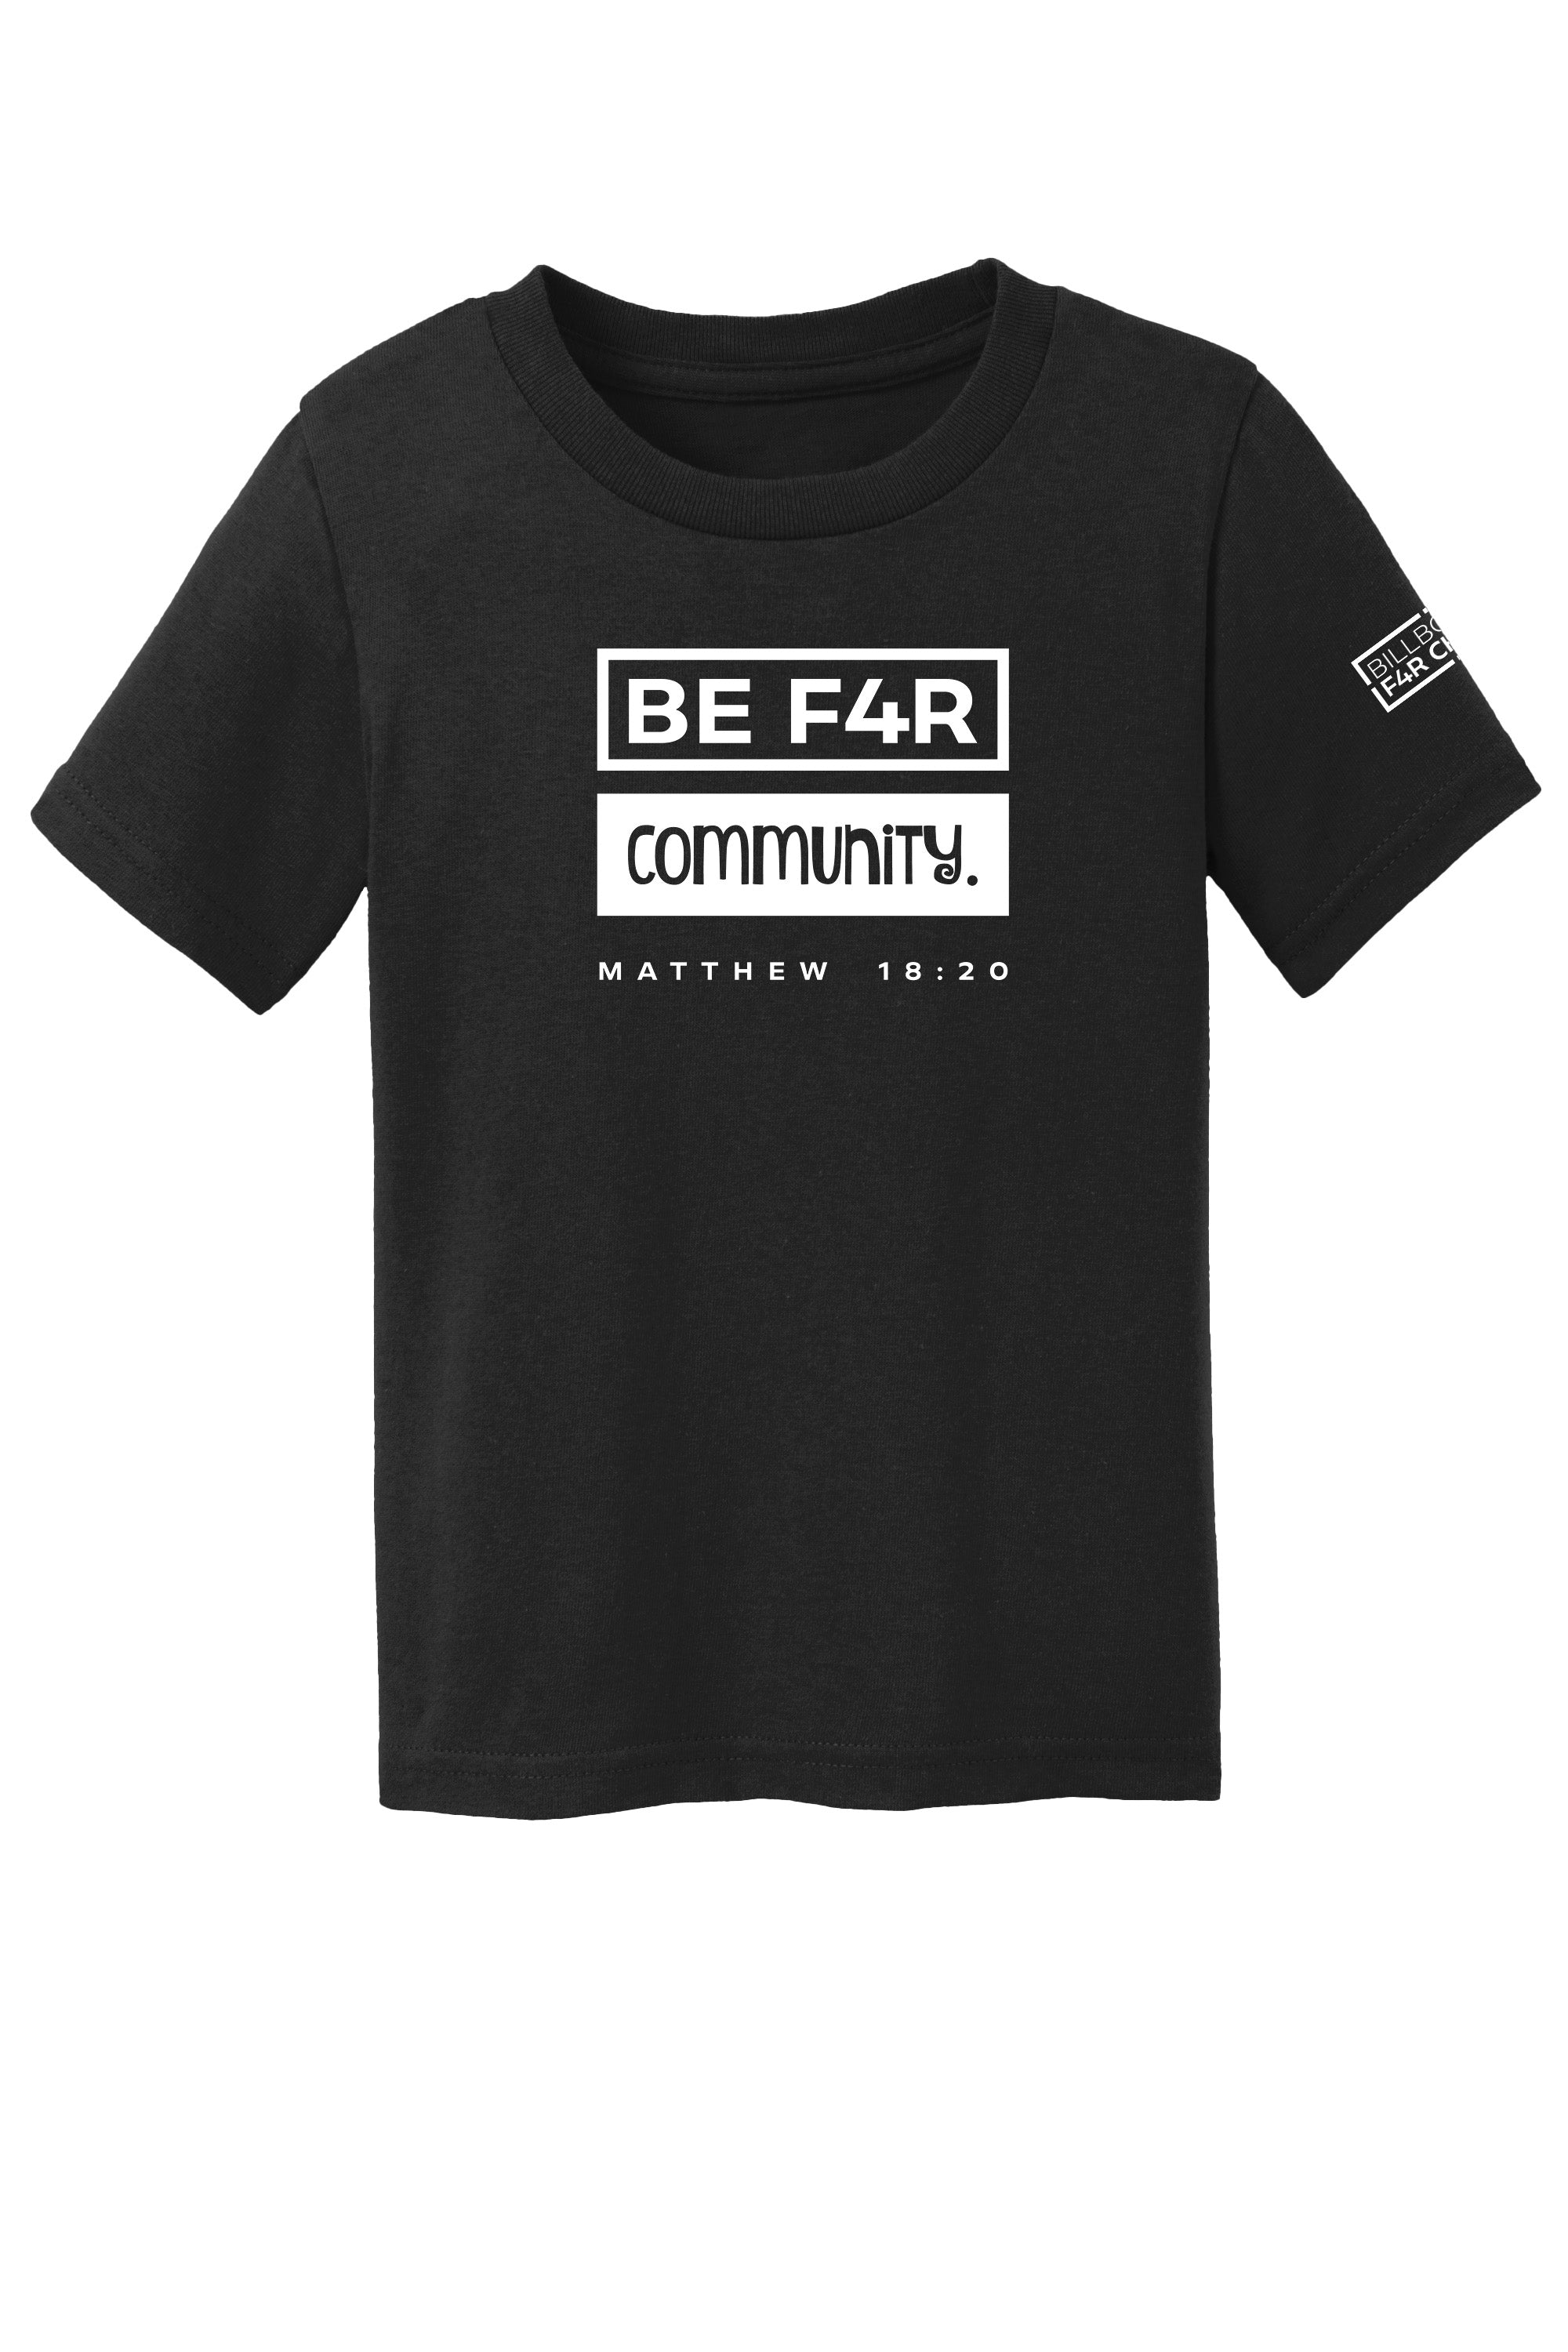 BE F4R Community 3 Toddler T-Shirt